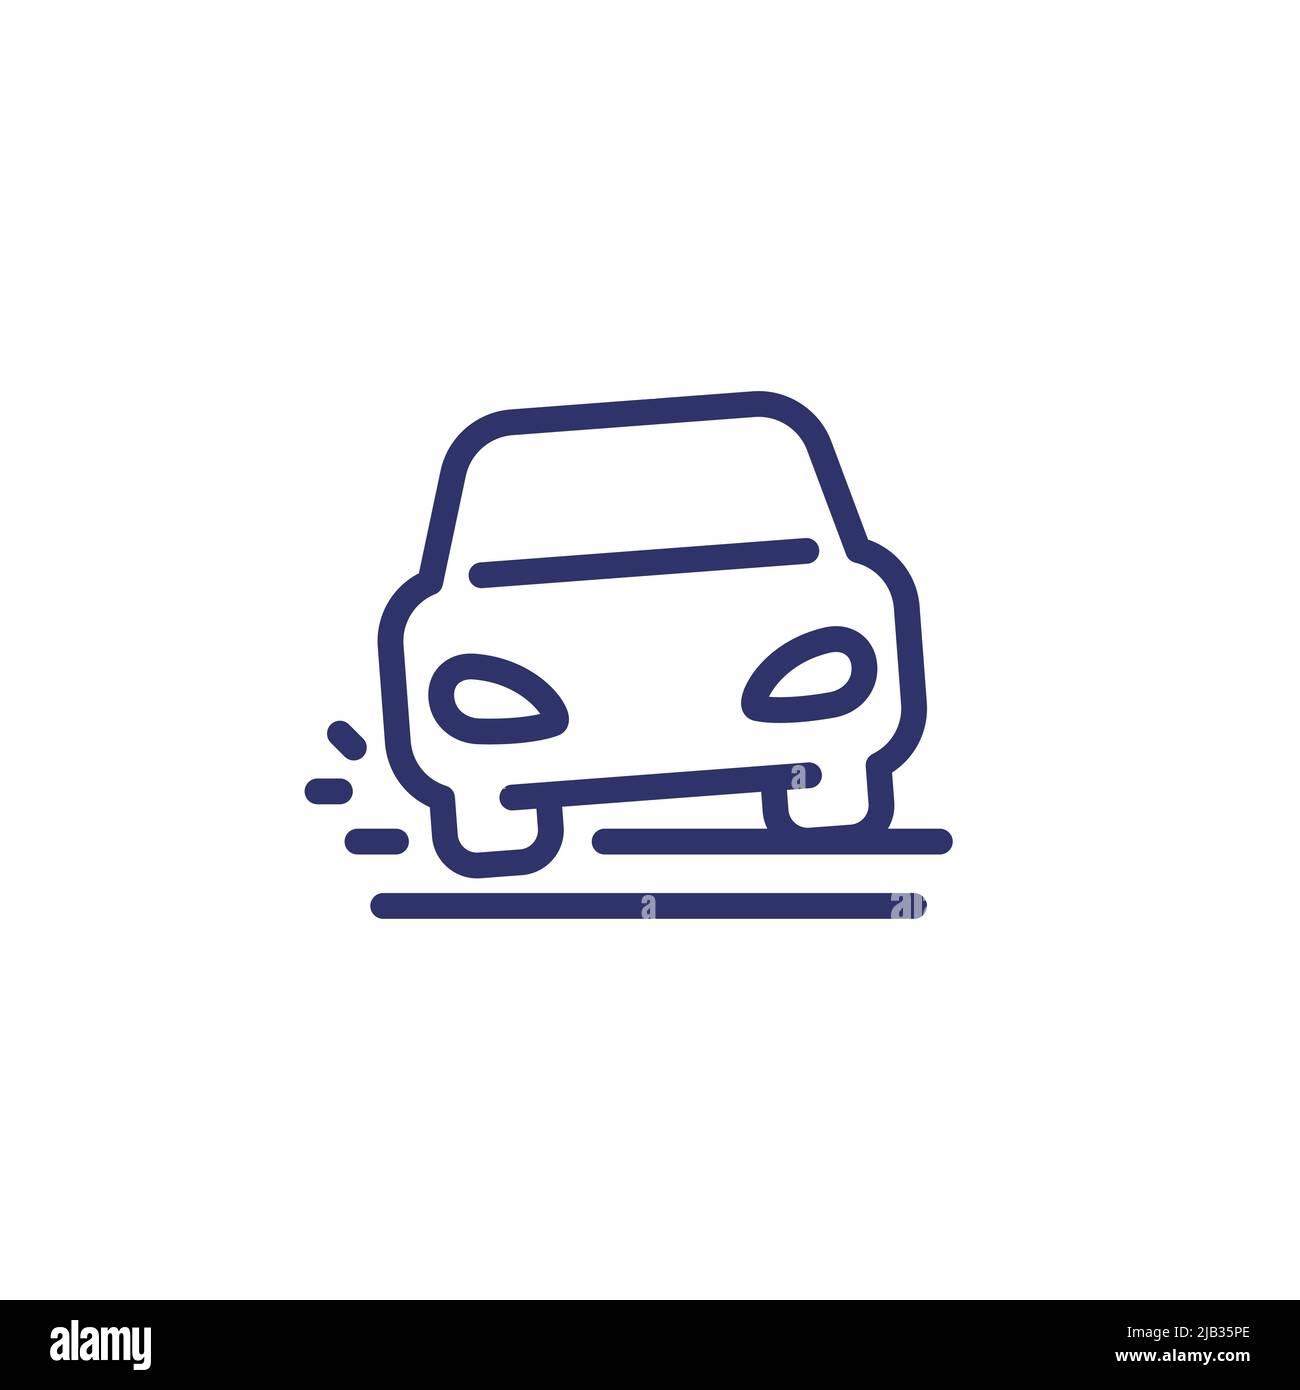 pothole line icon with car on the road Stock Vector